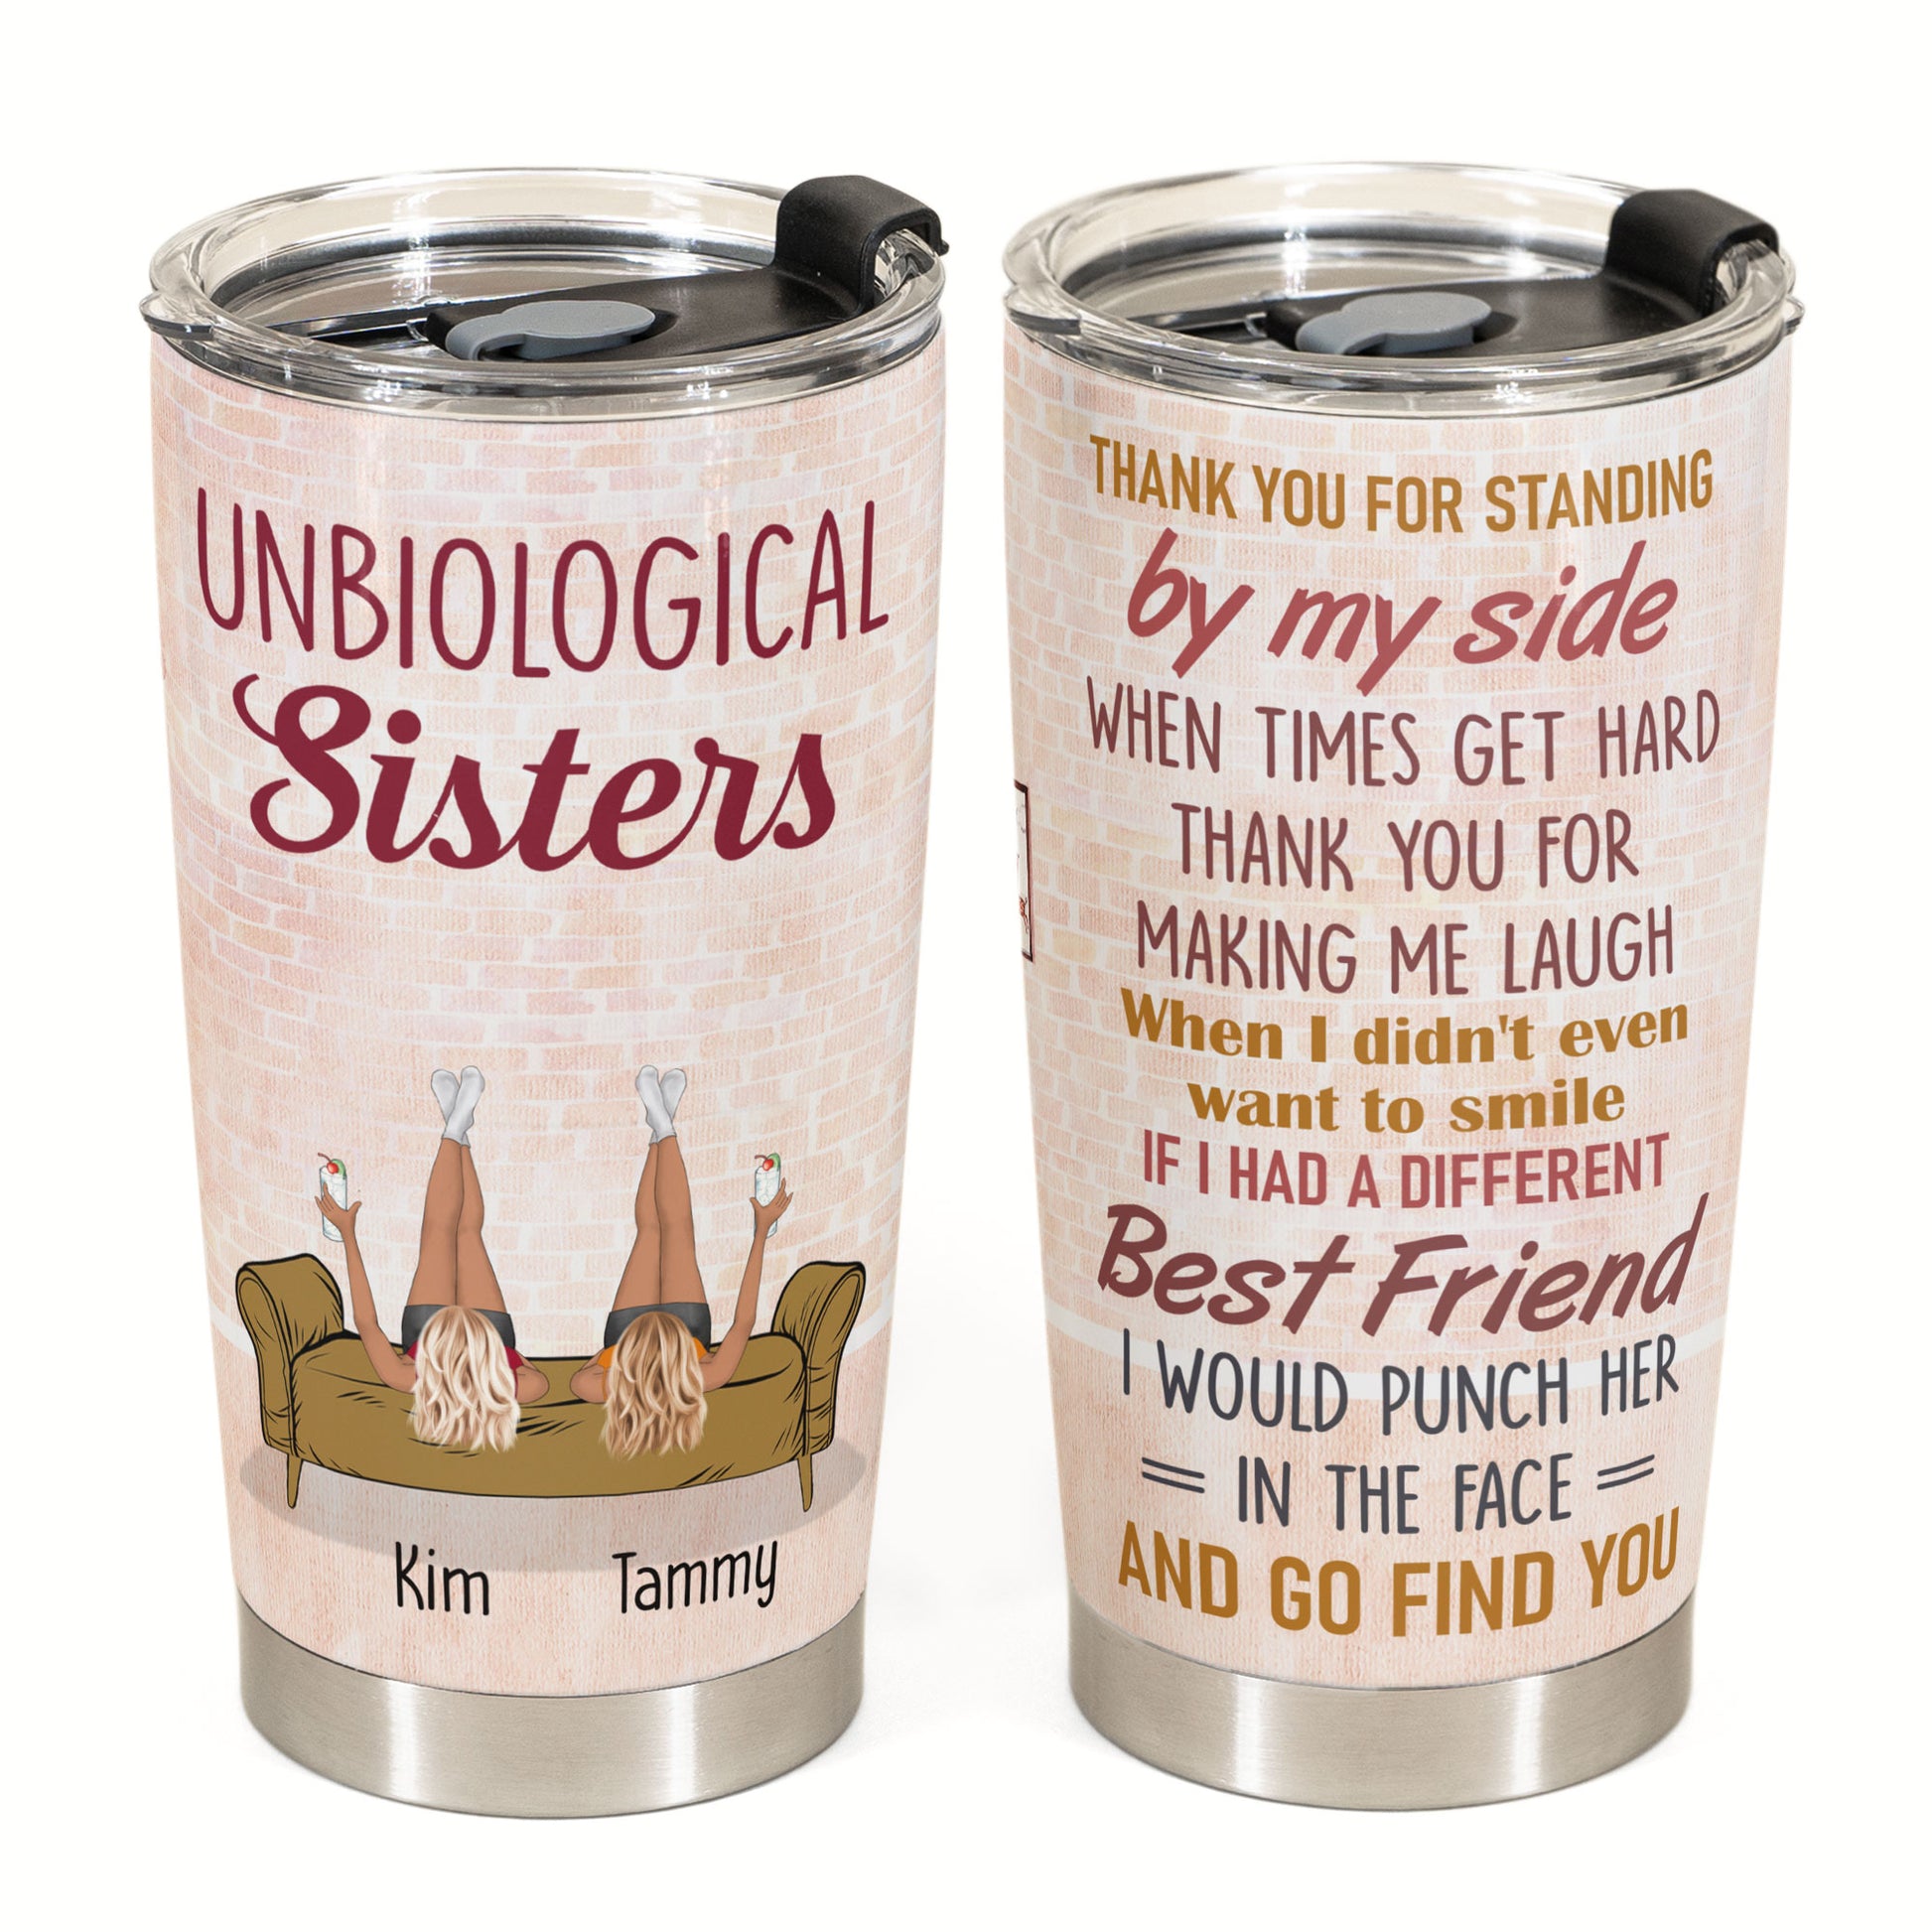 Glass tumbler - Thank you for being my emotional support coworker - Bestie  Personalized Custom Glass tumbler - Gift For Best Friends, BFF, Sisters